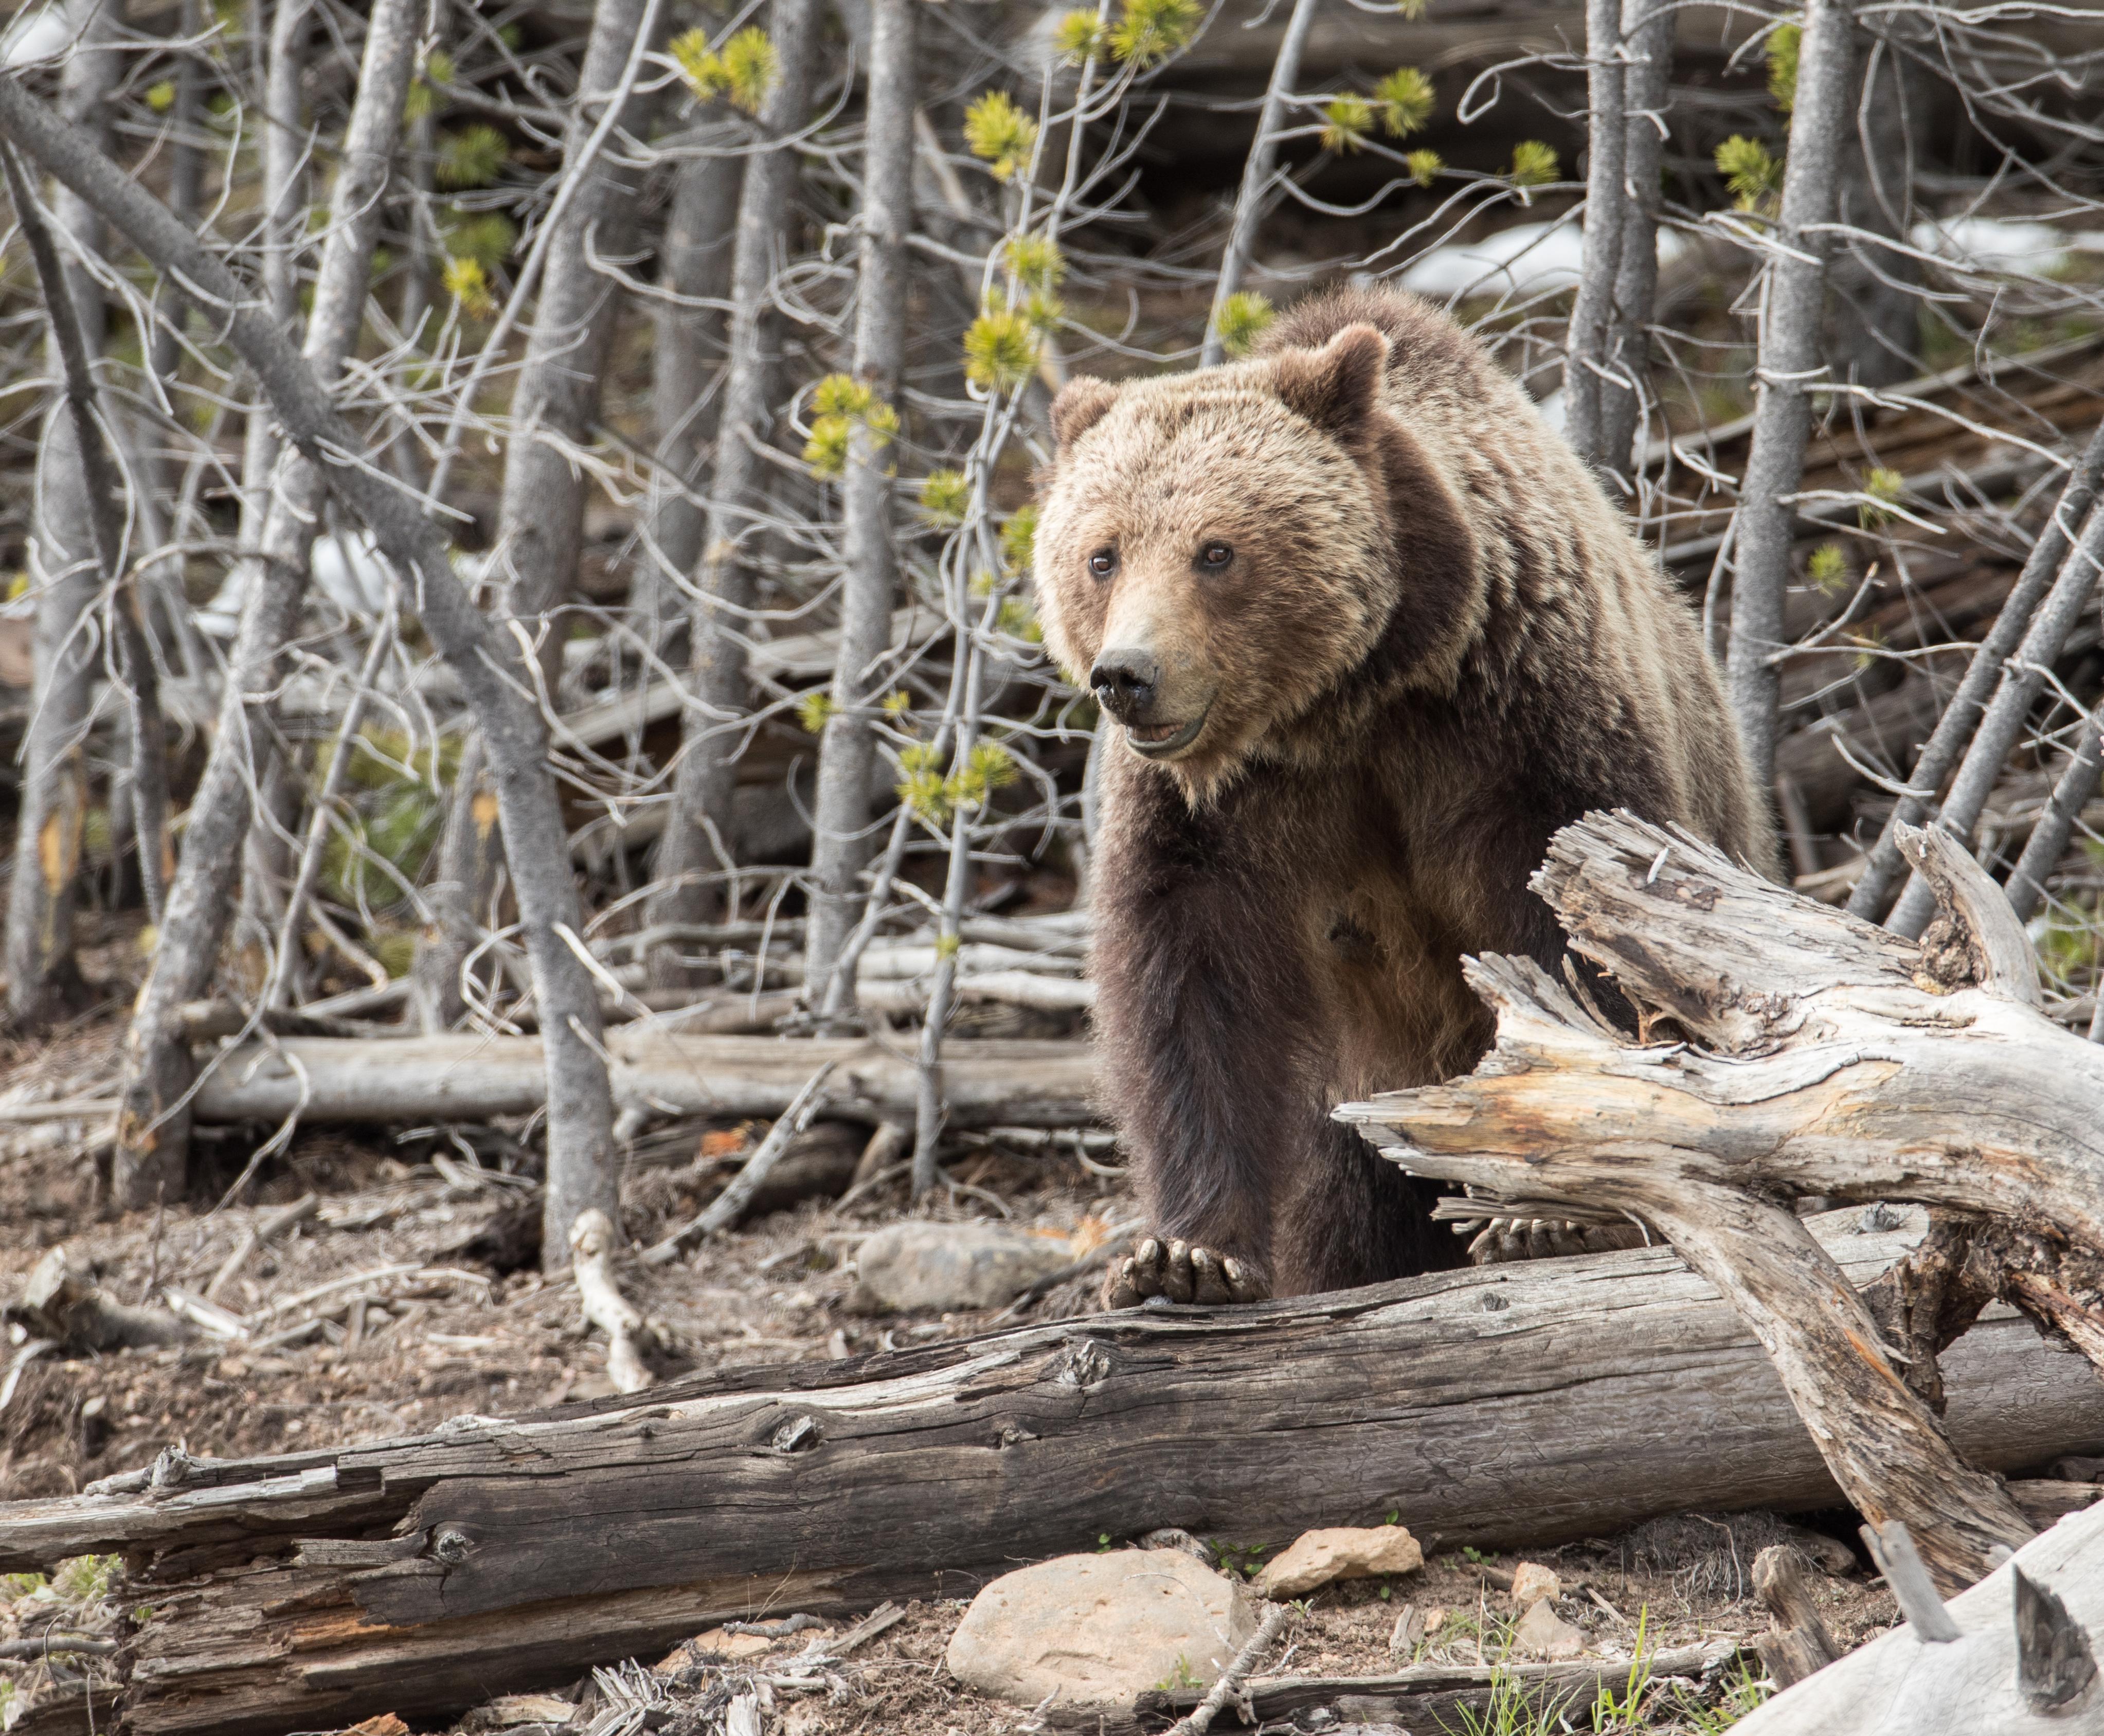 A grizzly bear standing on a fallen tree.